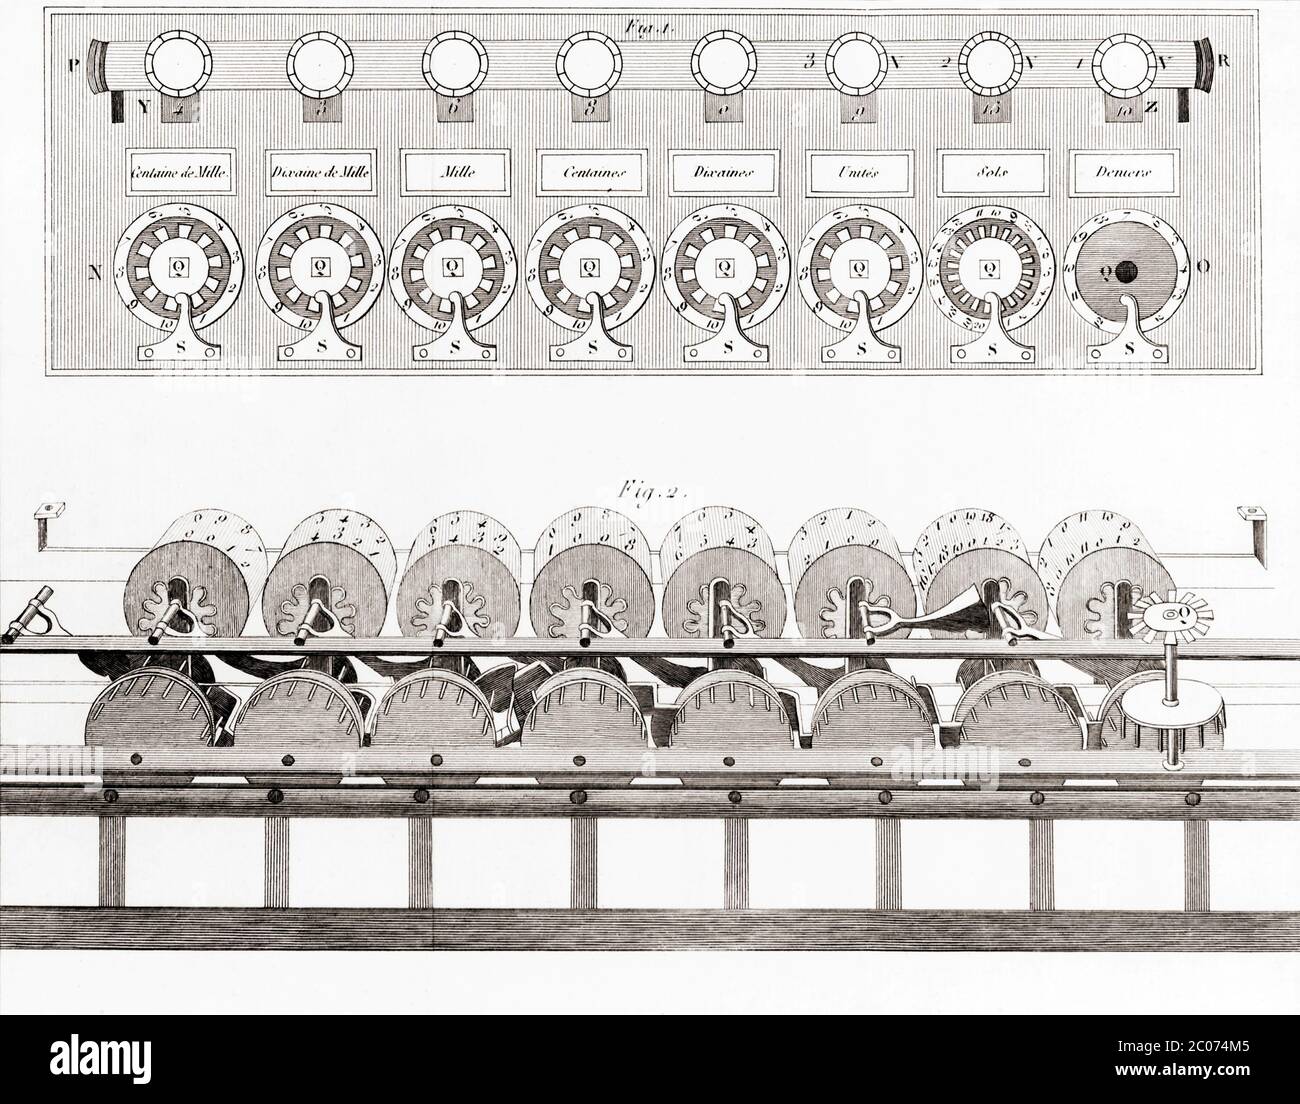 Calculating machine designed by Blaise Pascal.  Pascal’s calculators were also known as Pascalines. After an illustration by Louvet in Œuvres de Blaise Pascal, published 1819. Stock Photo